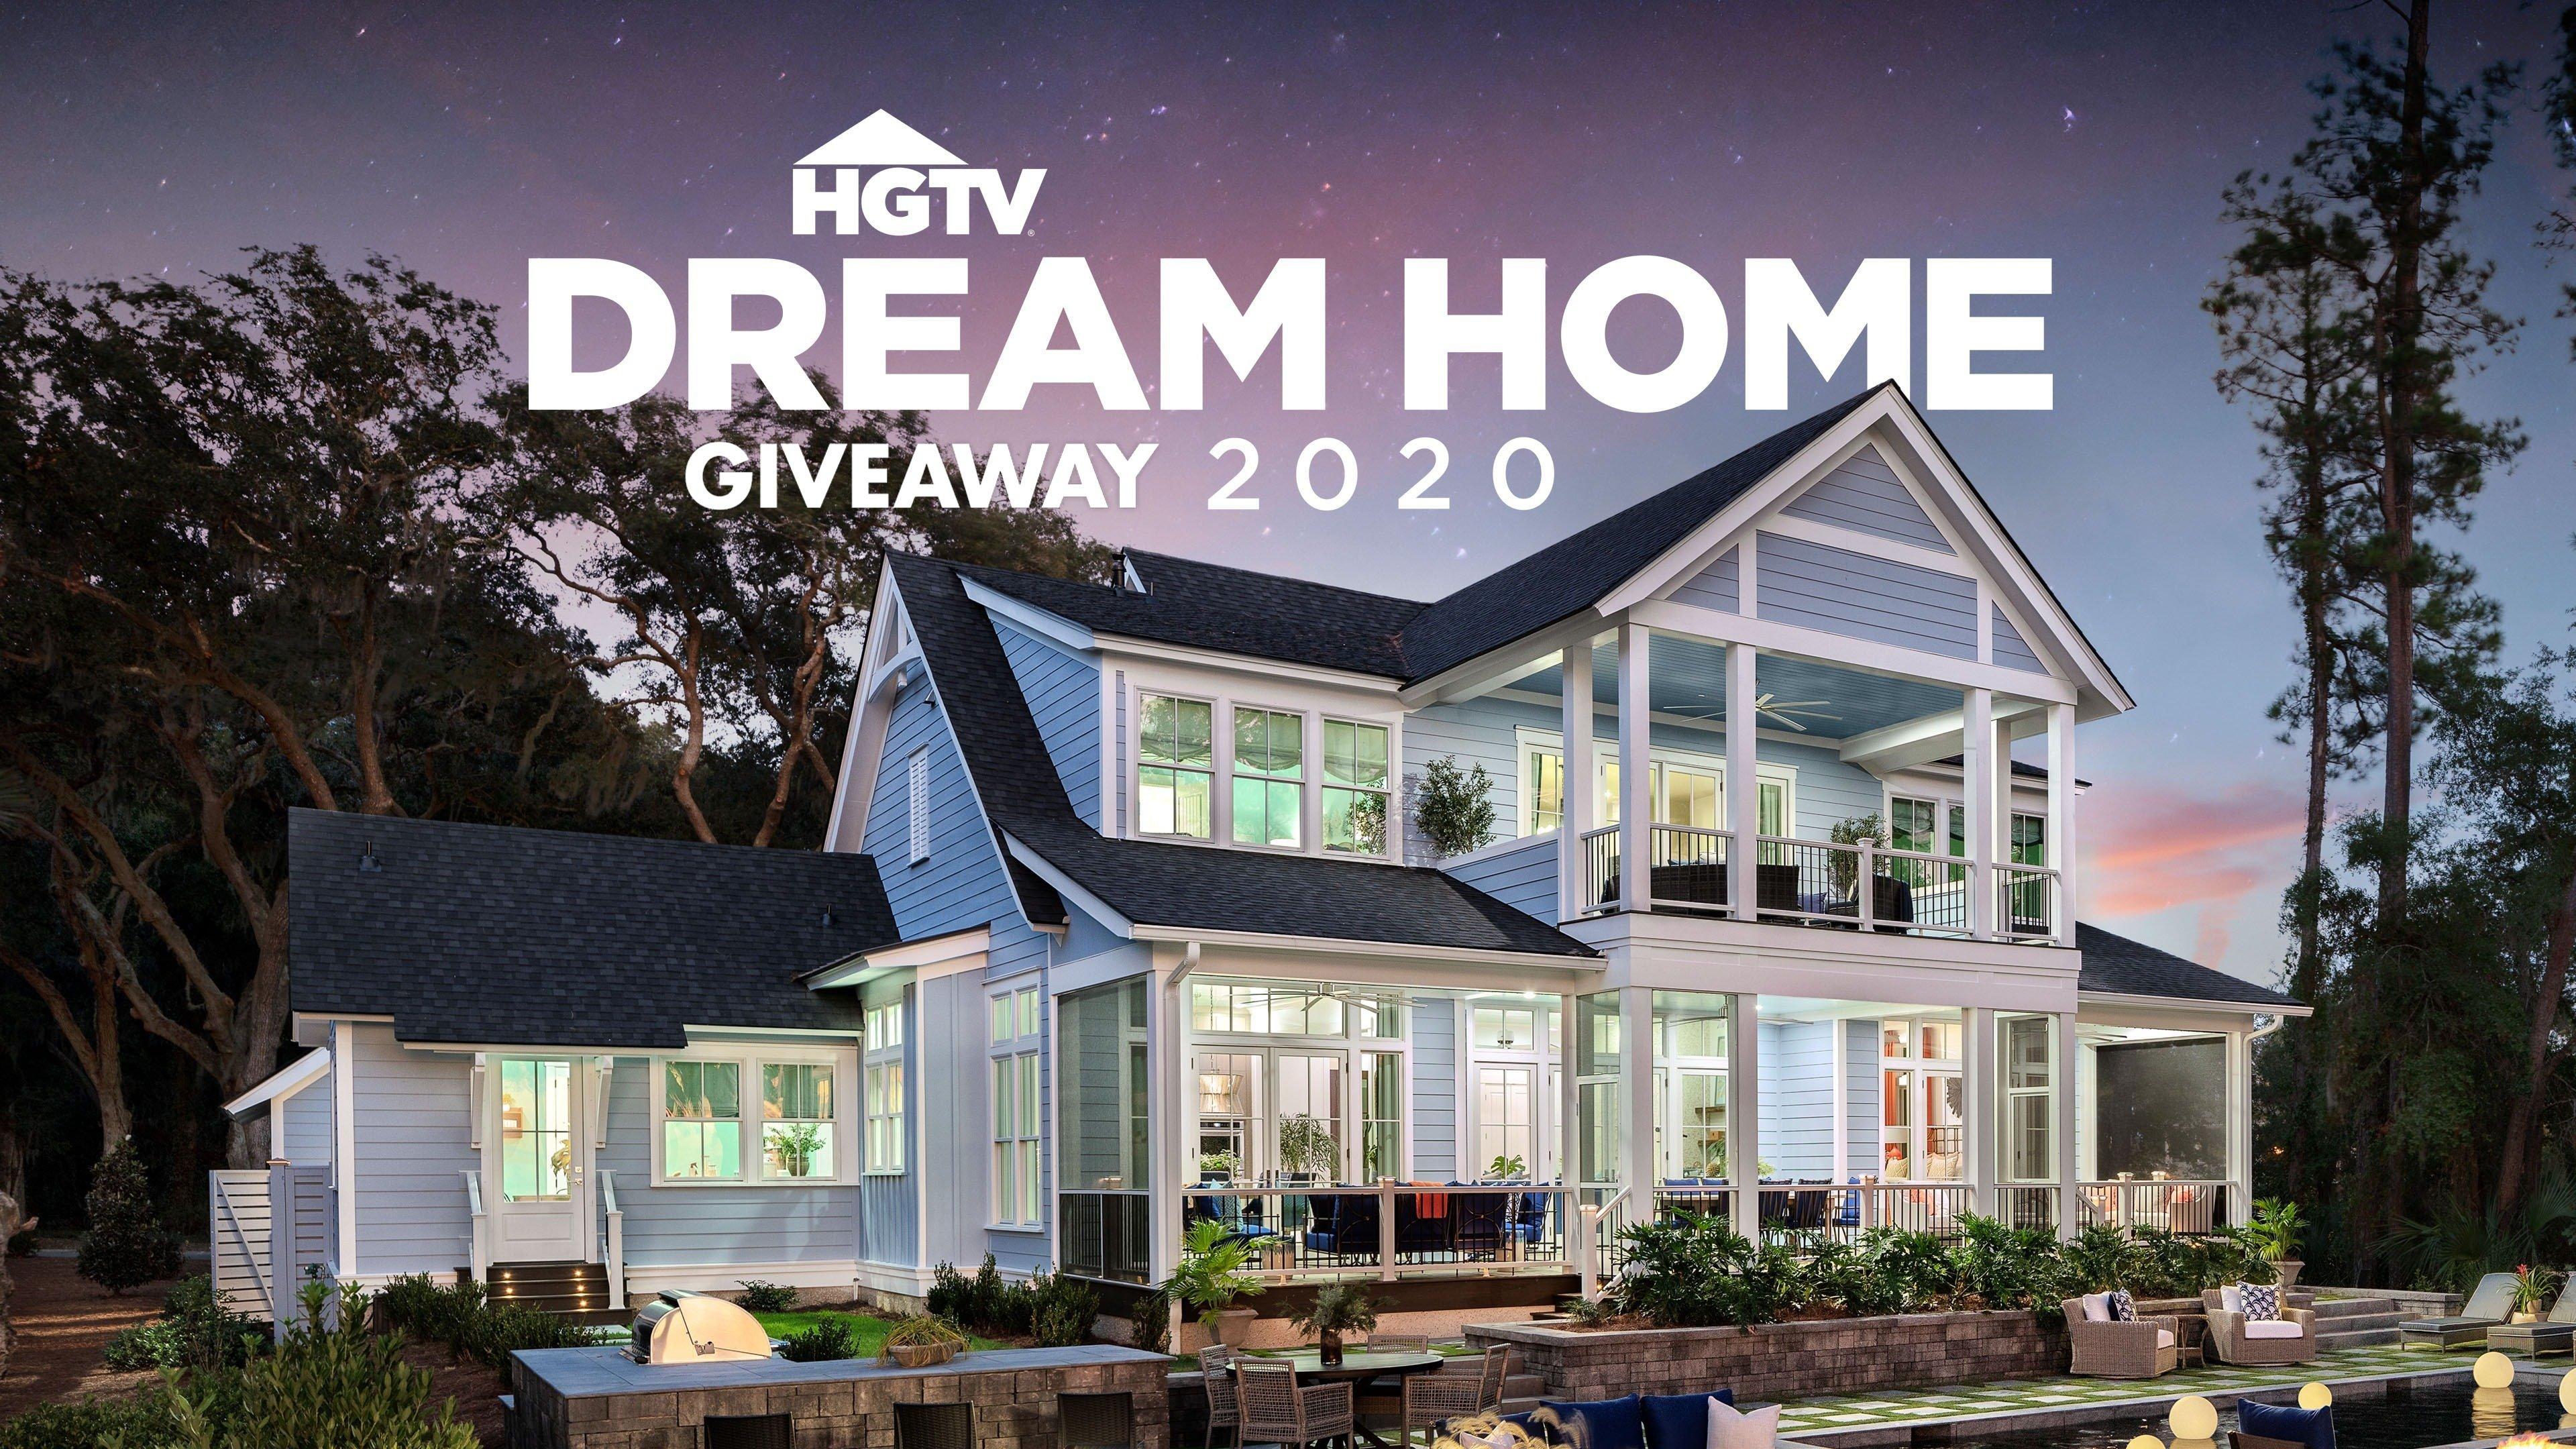 Watch HGTV Dream Home Giveaway 2020 Streaming Online on Philo (Free Trial)